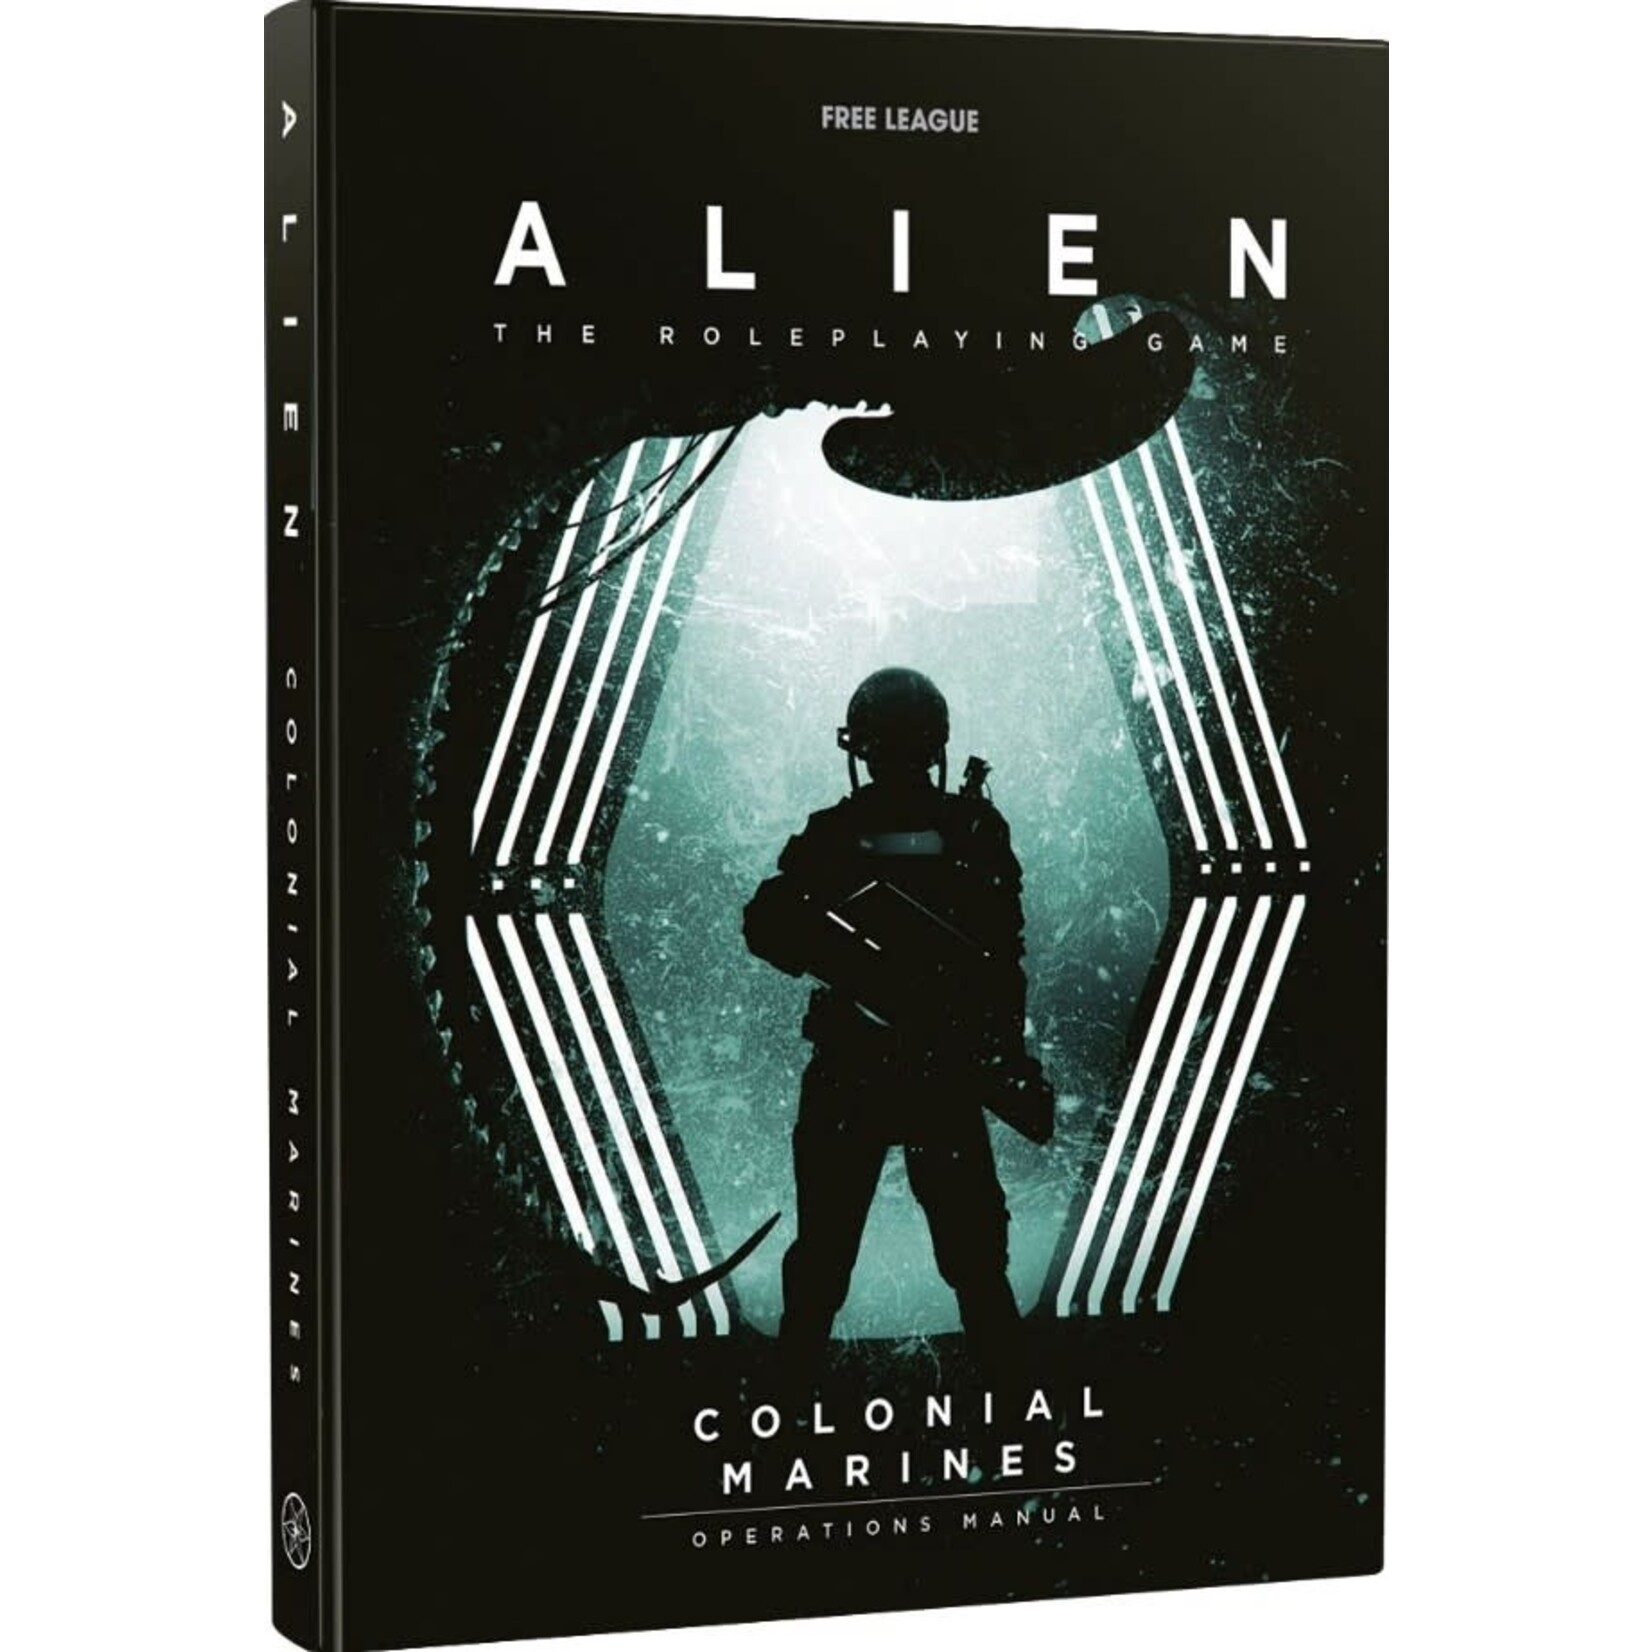 Free League Publishing ALIEN: The Roleplaying Game: Colonial Marines Operations Manual